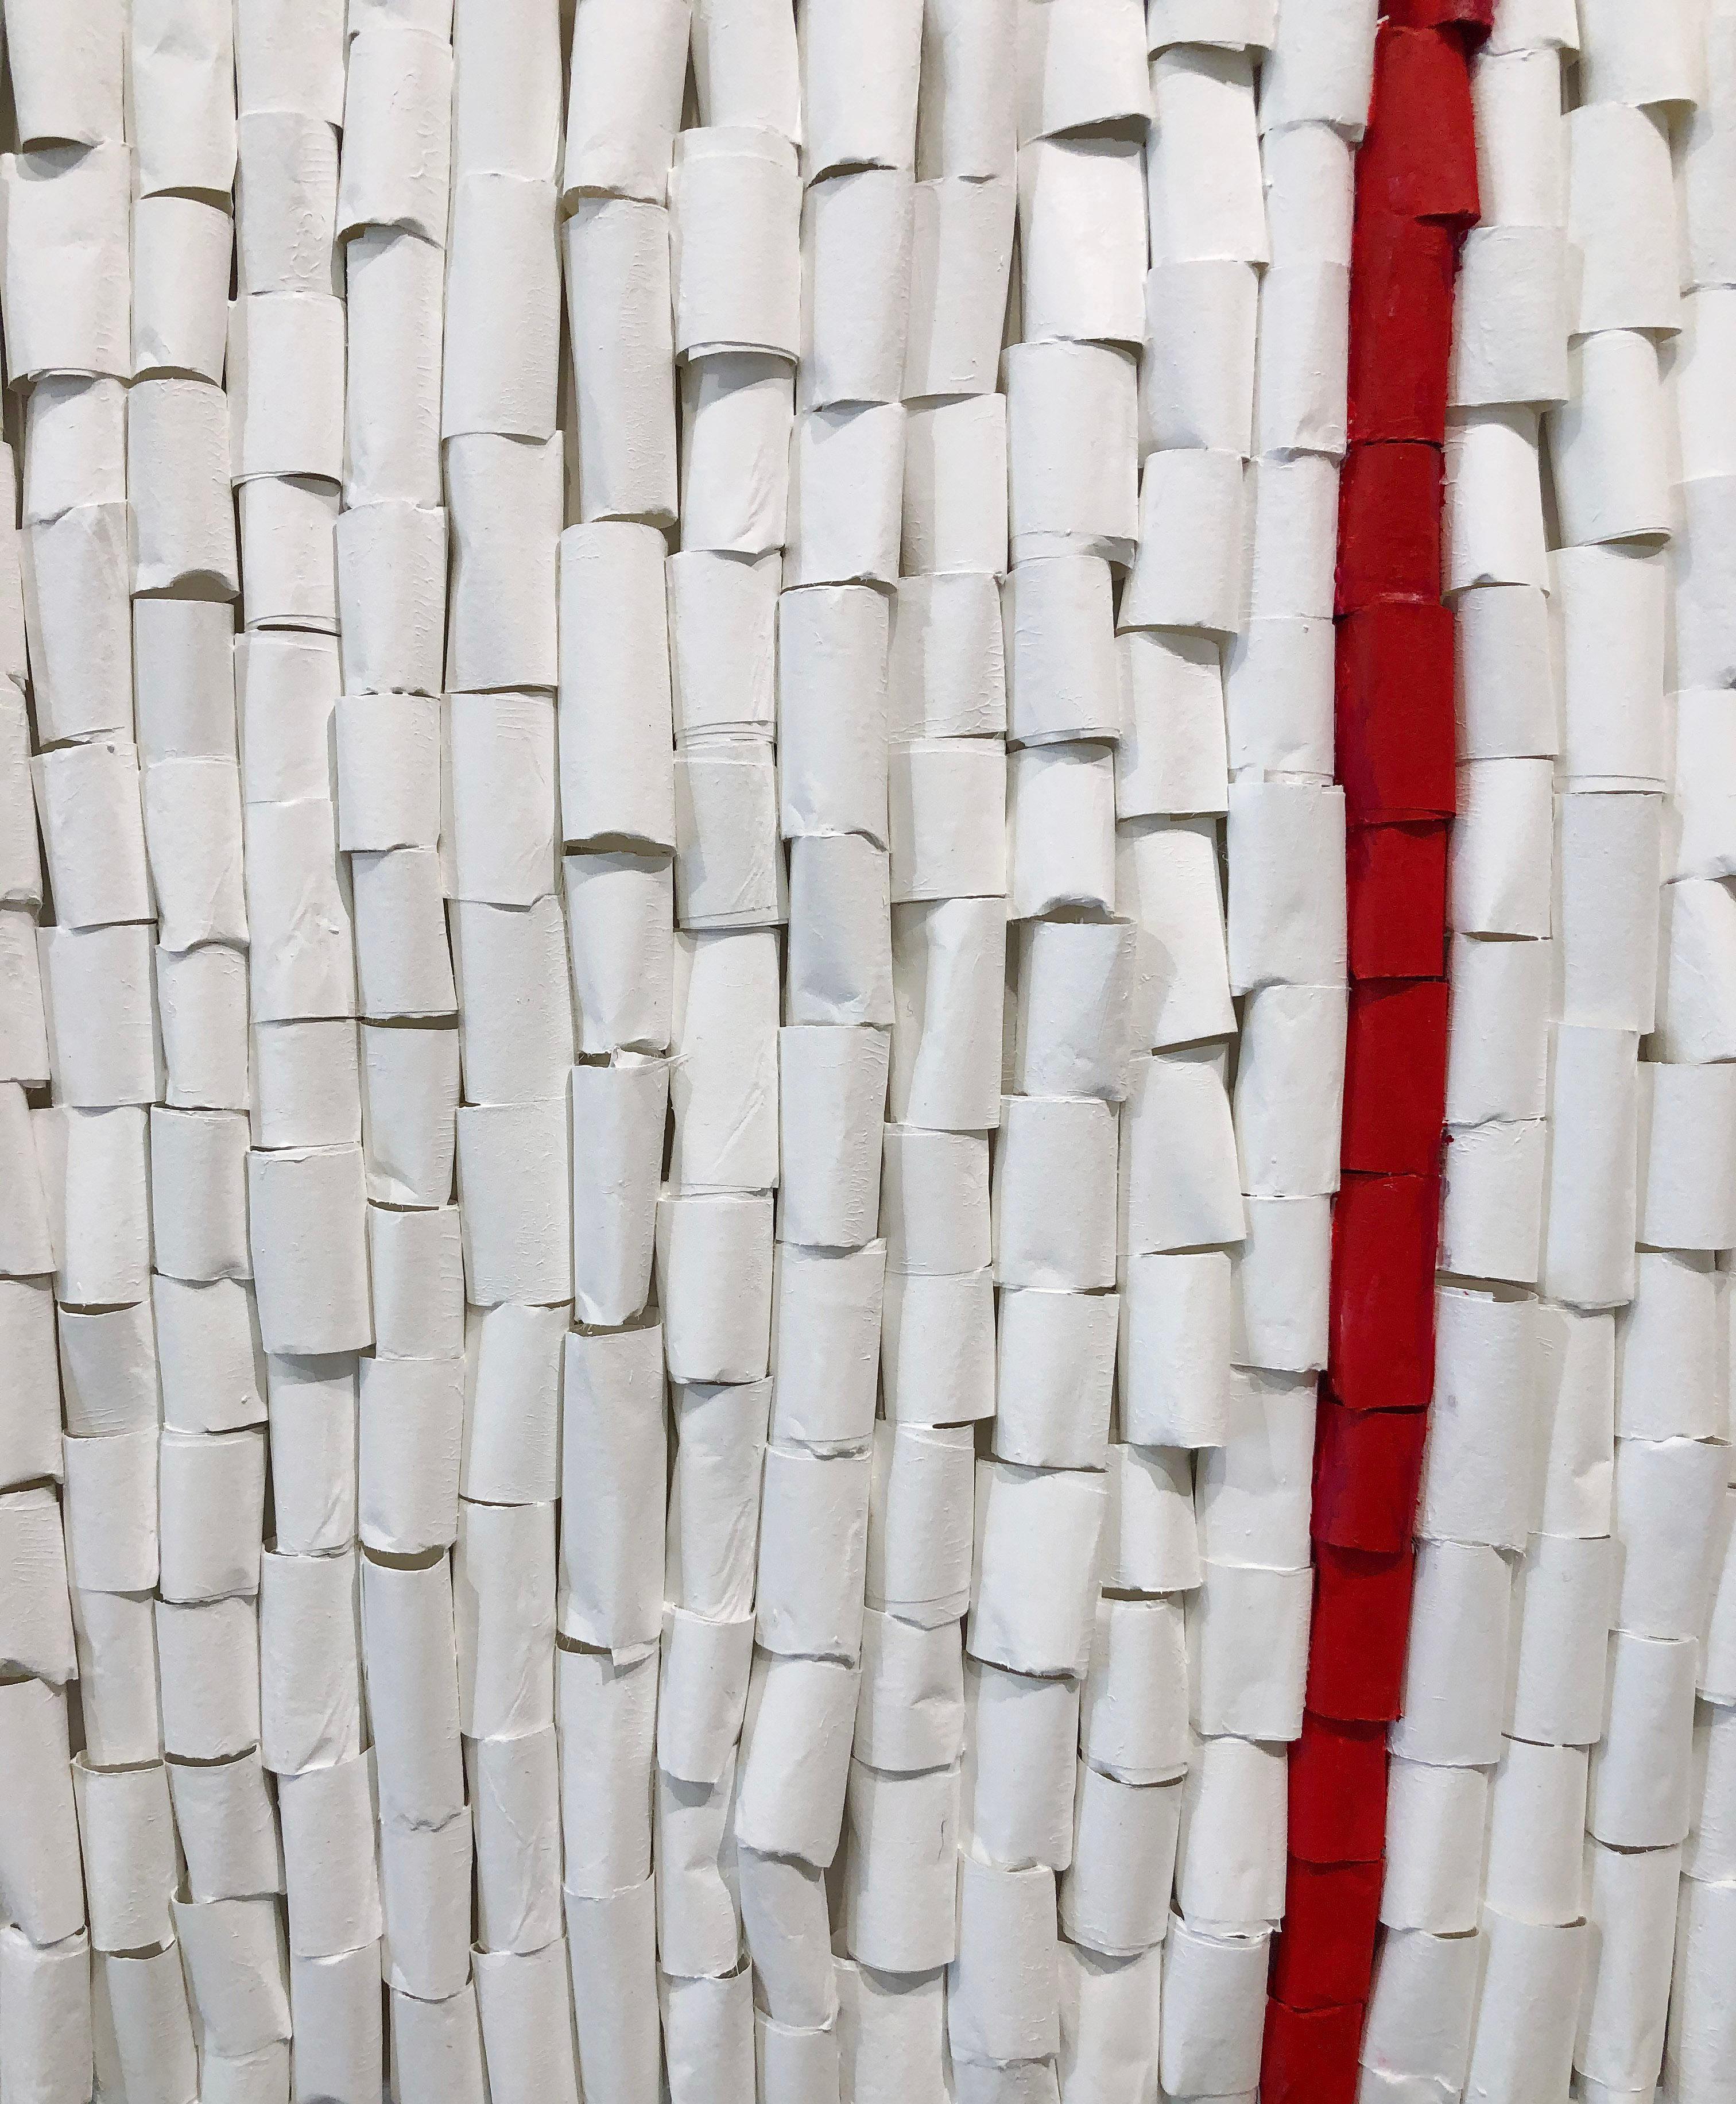 Rice paper & acrylic, Sculptural wall work, Barbara Hirsch, In Parallel 4